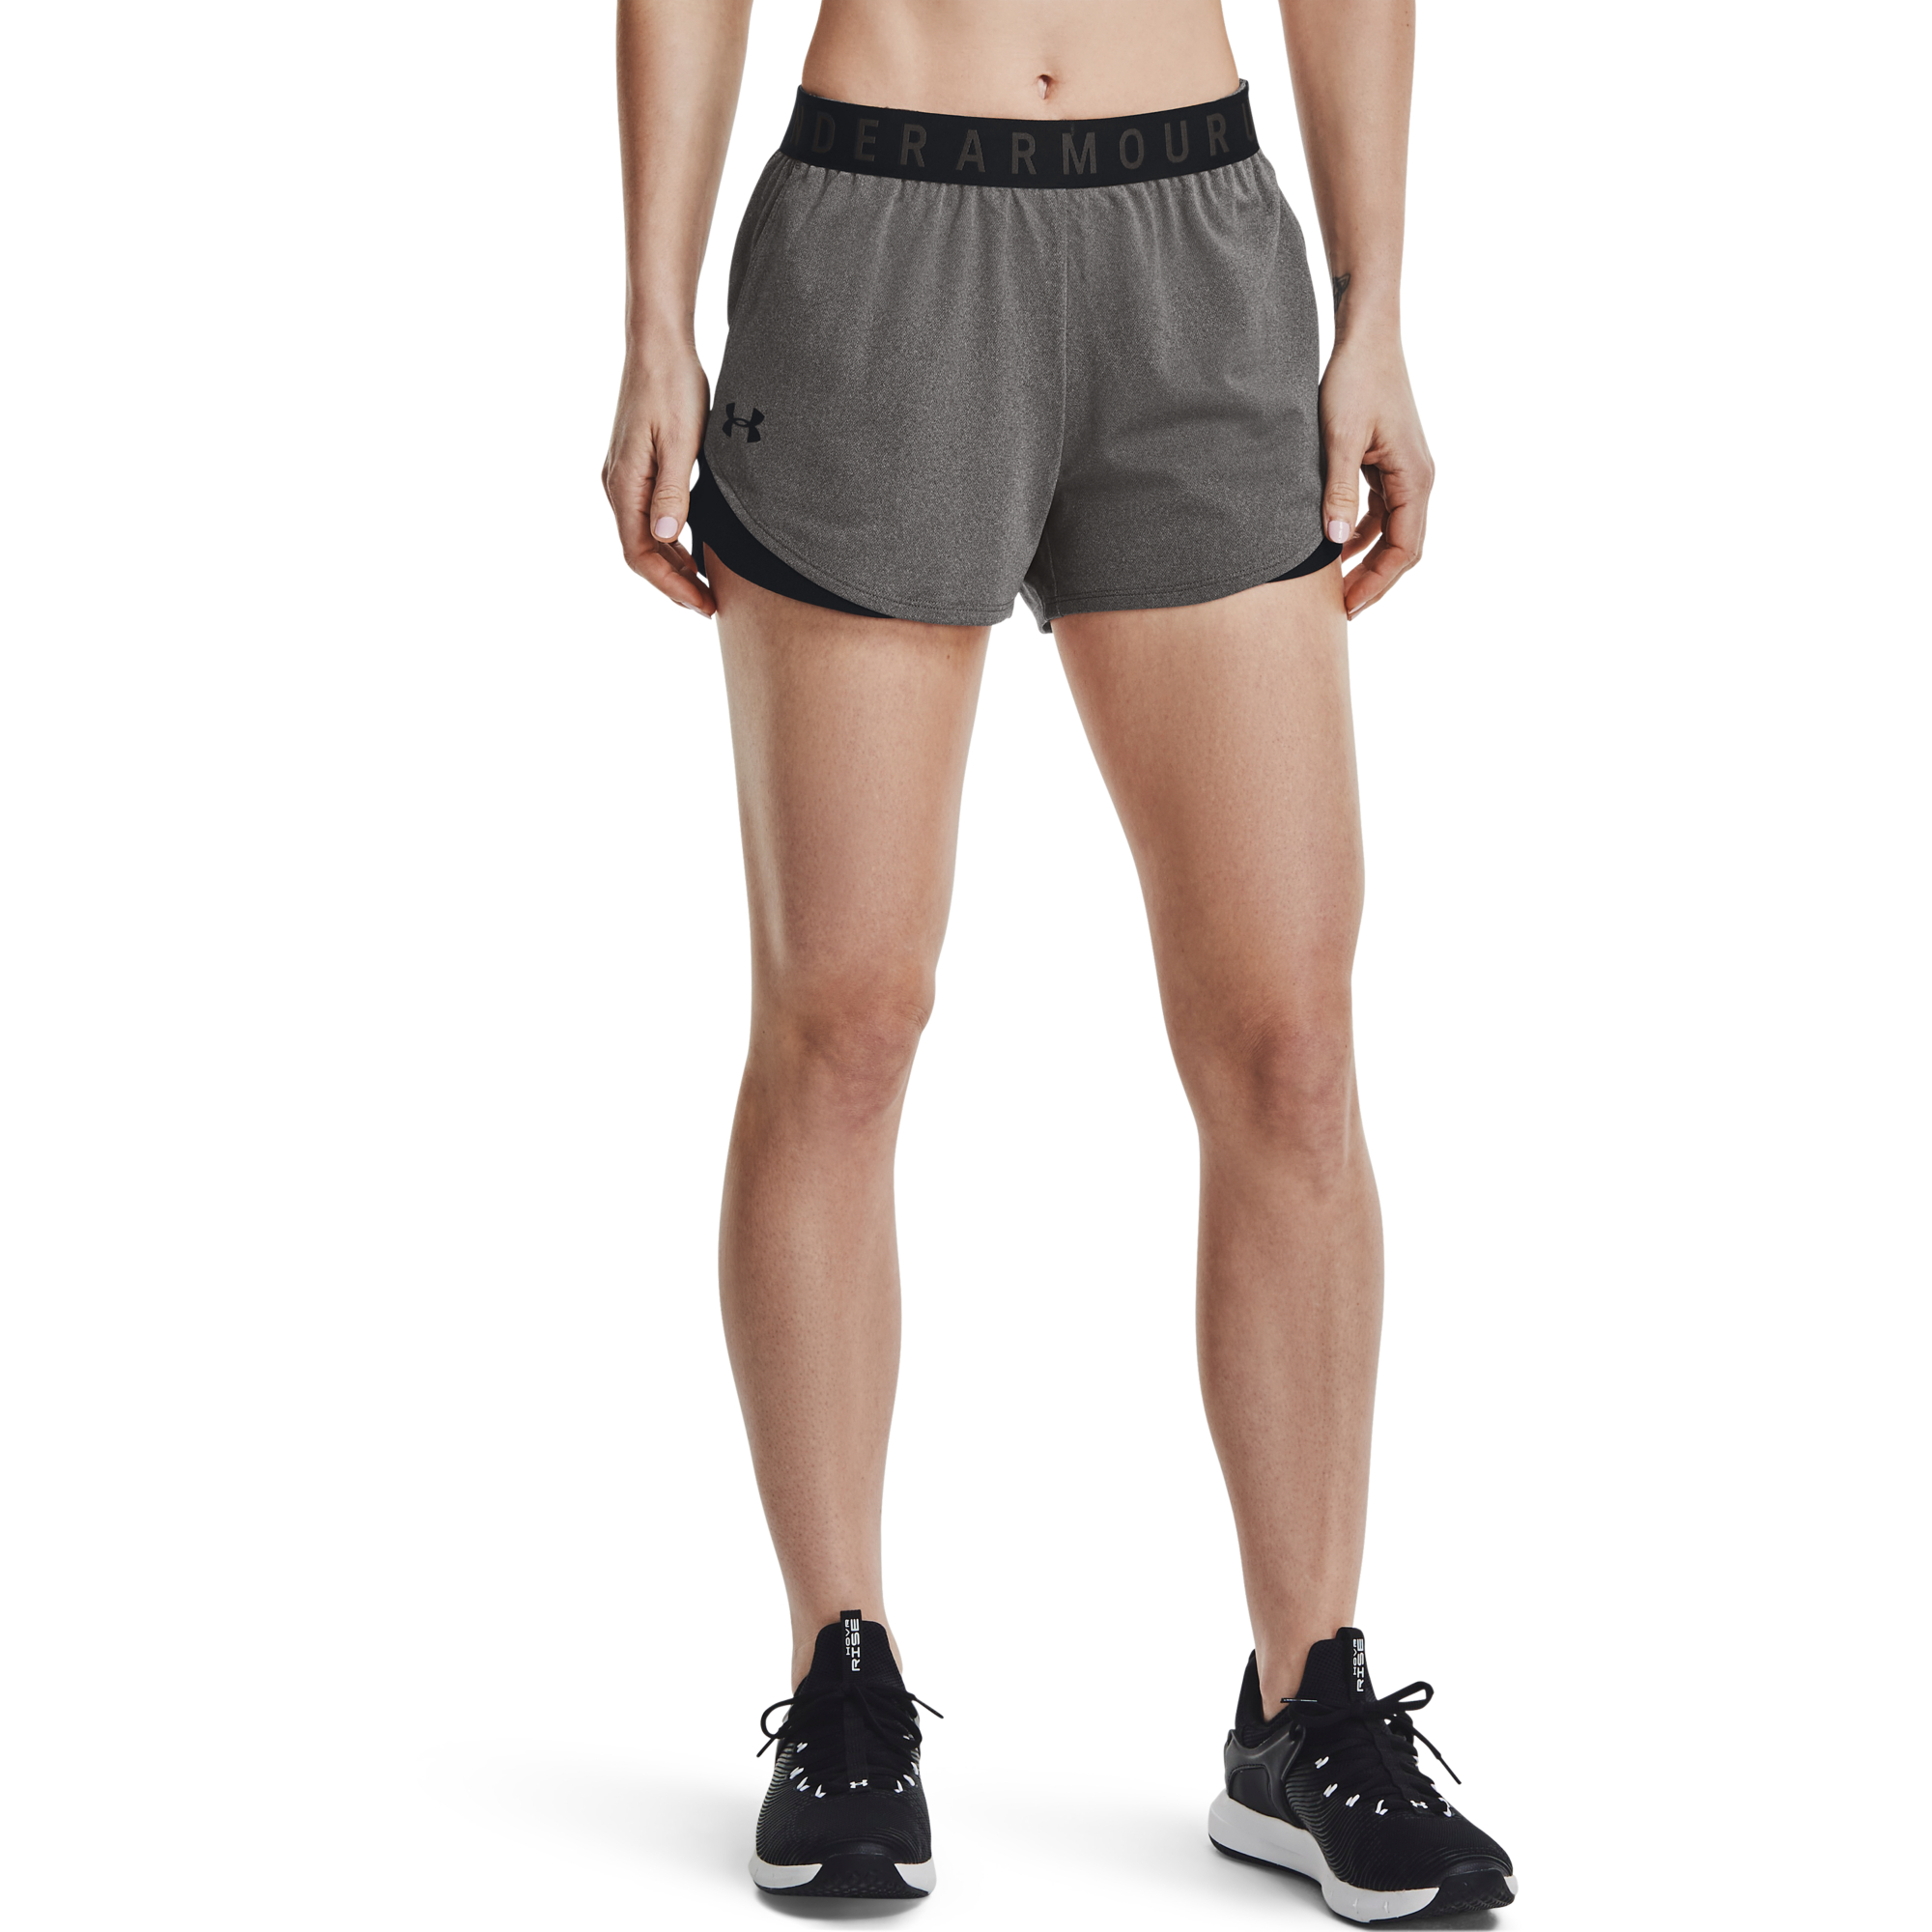 Women’s Play Up Shorts 3.0 Carbon Heather